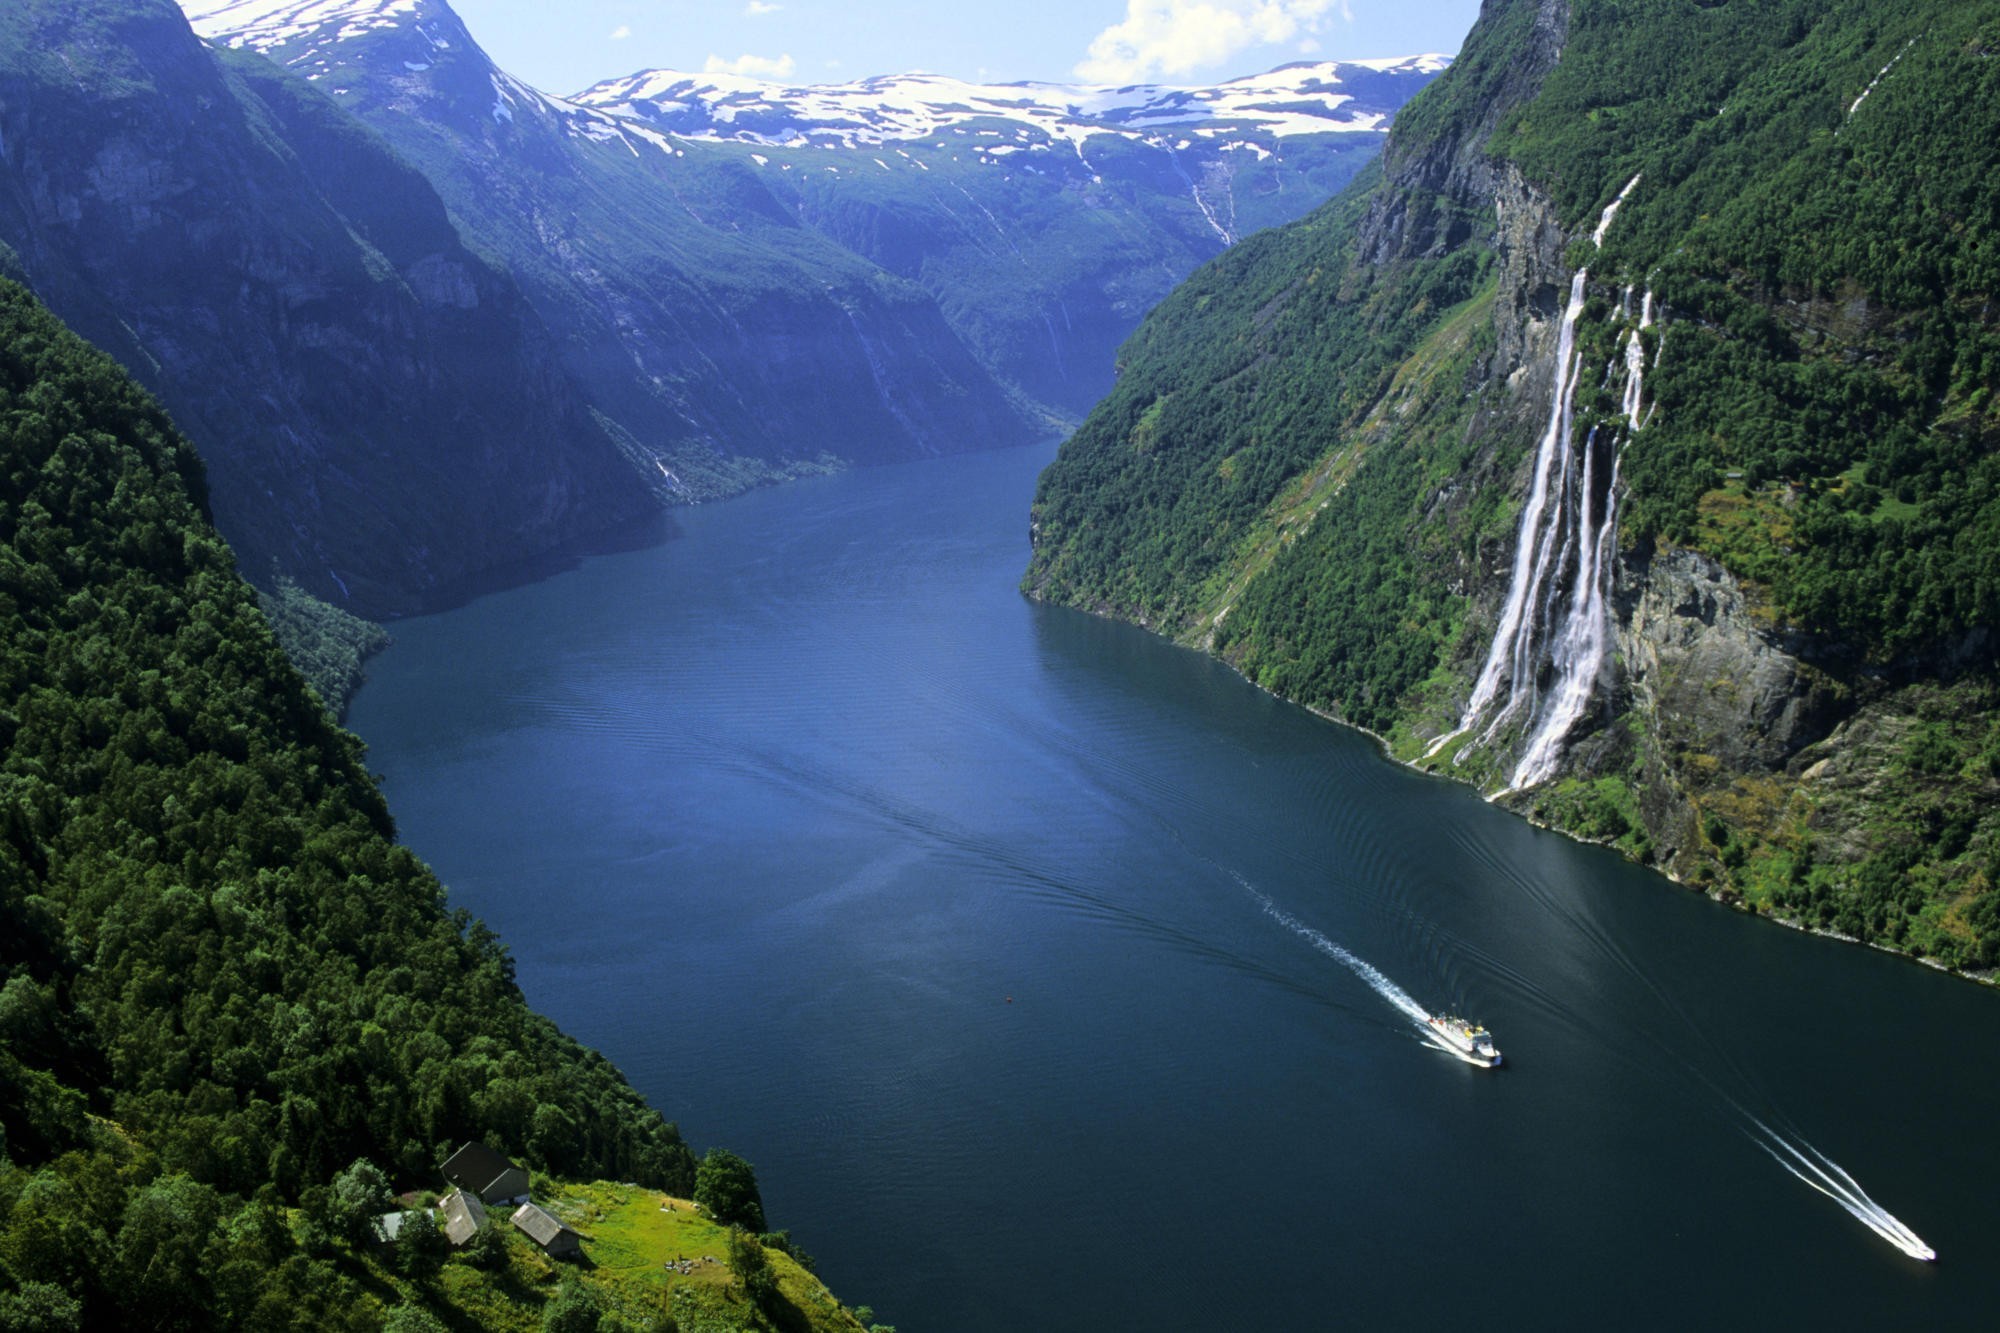 General 2000x1333 Norway fjord landscape mountains nordic landscapes water nature